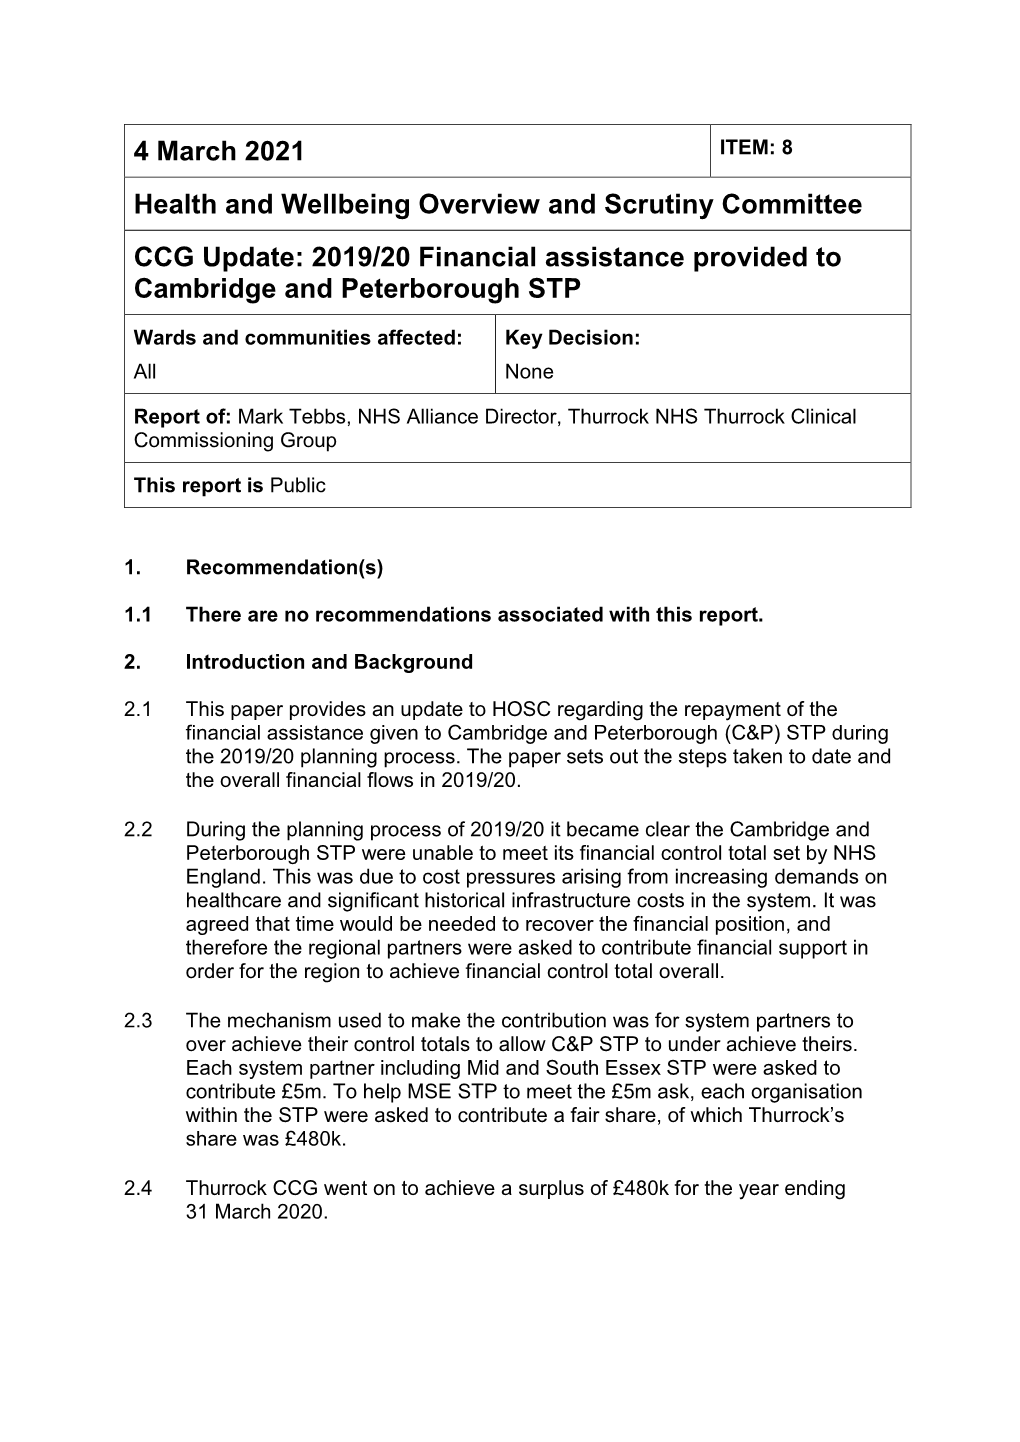 2019/20 Financial Assistance Provided to Cambridge and Peterborough STP PDF 442 KB